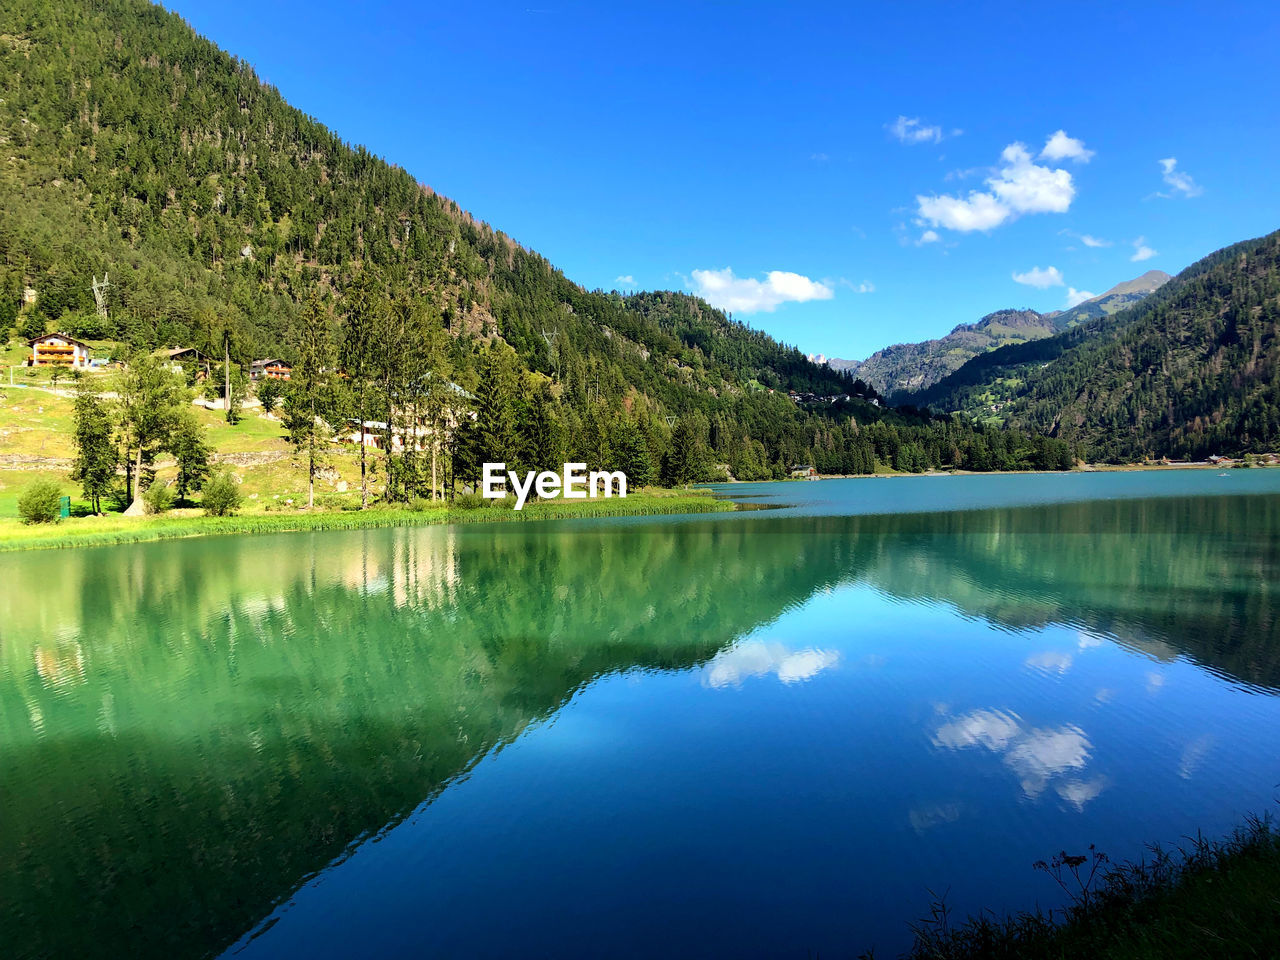 water, lake, scenics - nature, mountain, reflection, beauty in nature, tree, sky, plant, tranquility, tranquil scene, nature, body of water, environment, landscape, forest, blue, land, mountain range, reservoir, pine tree, no people, pine woodland, coniferous tree, pinaceae, green, idyllic, travel destinations, non-urban scene, wilderness, woodland, travel, outdoors, summer, day, crater lake, clear sky, tourism, cloud, activity, standing water